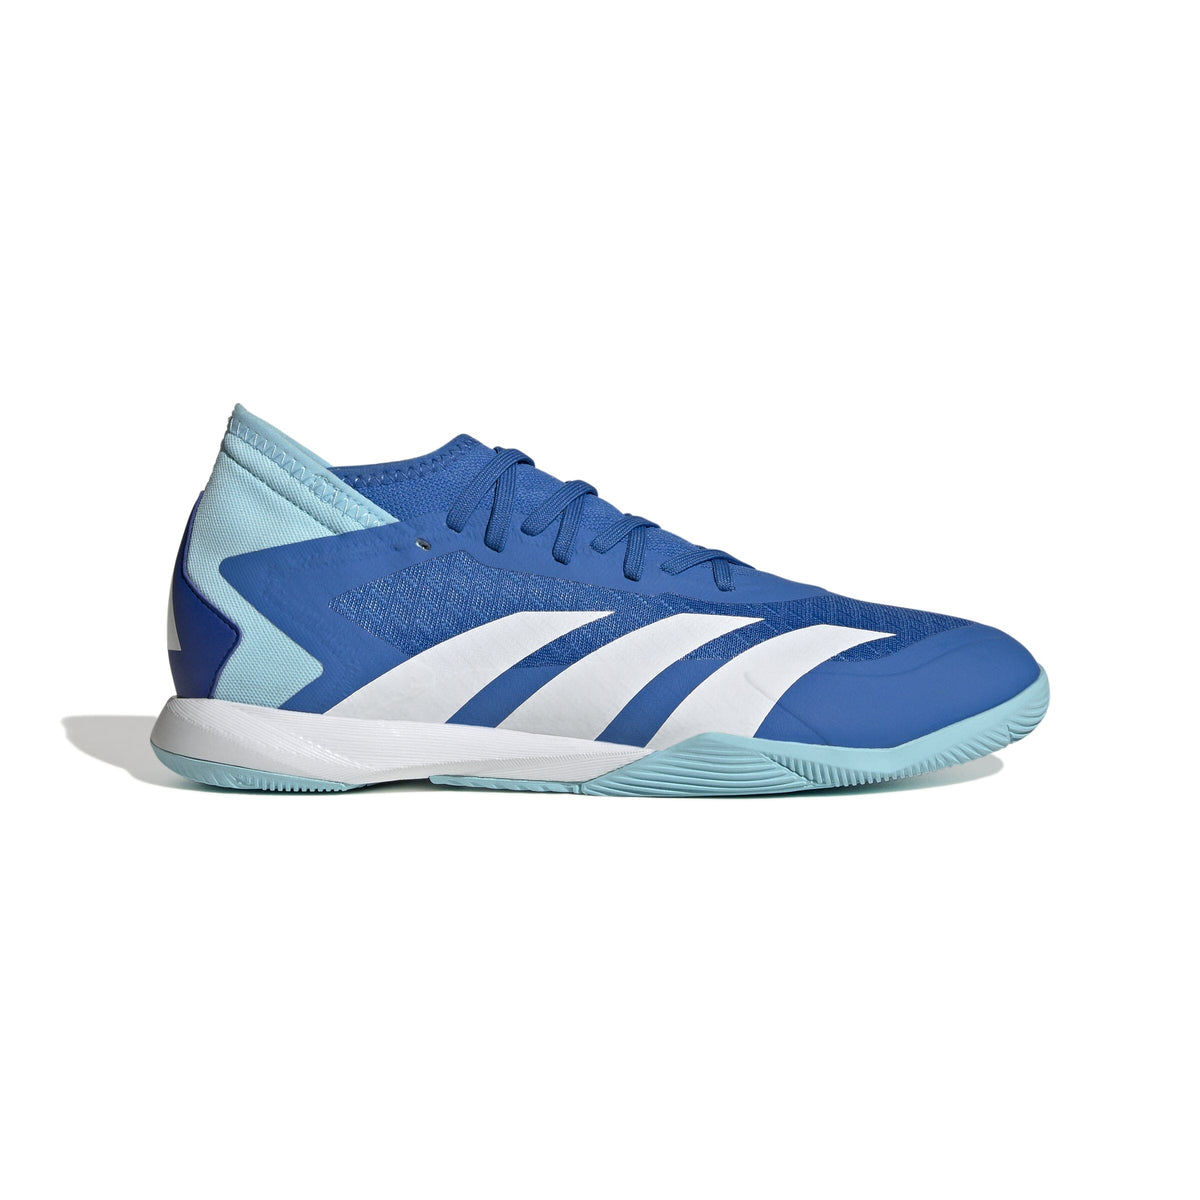 adidas Unisex Predator Accuracy.3 Indoor Shoes | GY9991 Soccer Cleats Adidas 7.5 Bright Royal / FTWR White / Bliss Blue 